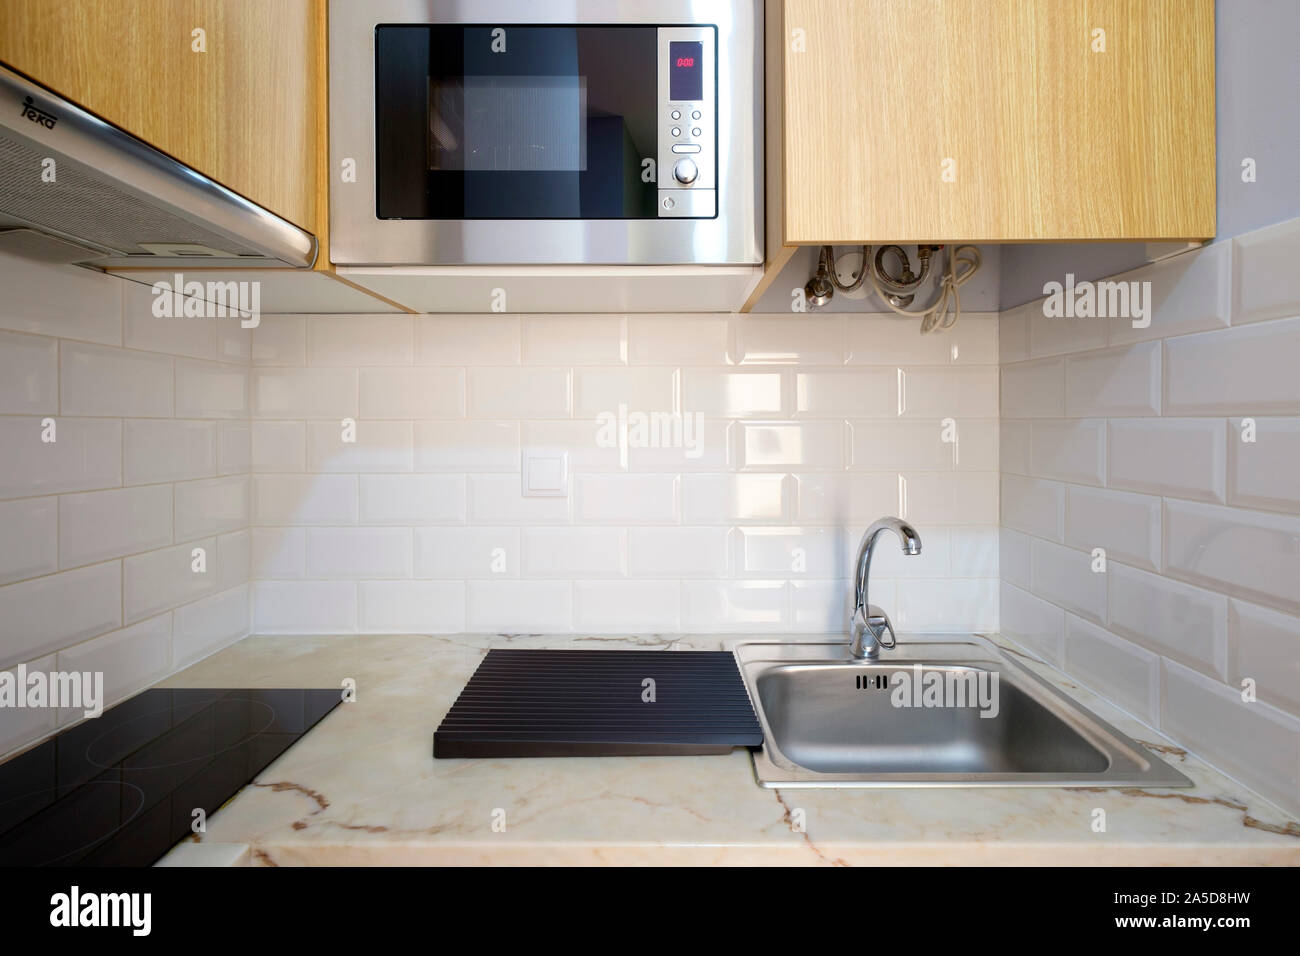 Tiny modern kitchen counter with microwave oven, sink and stove top Stock Photo